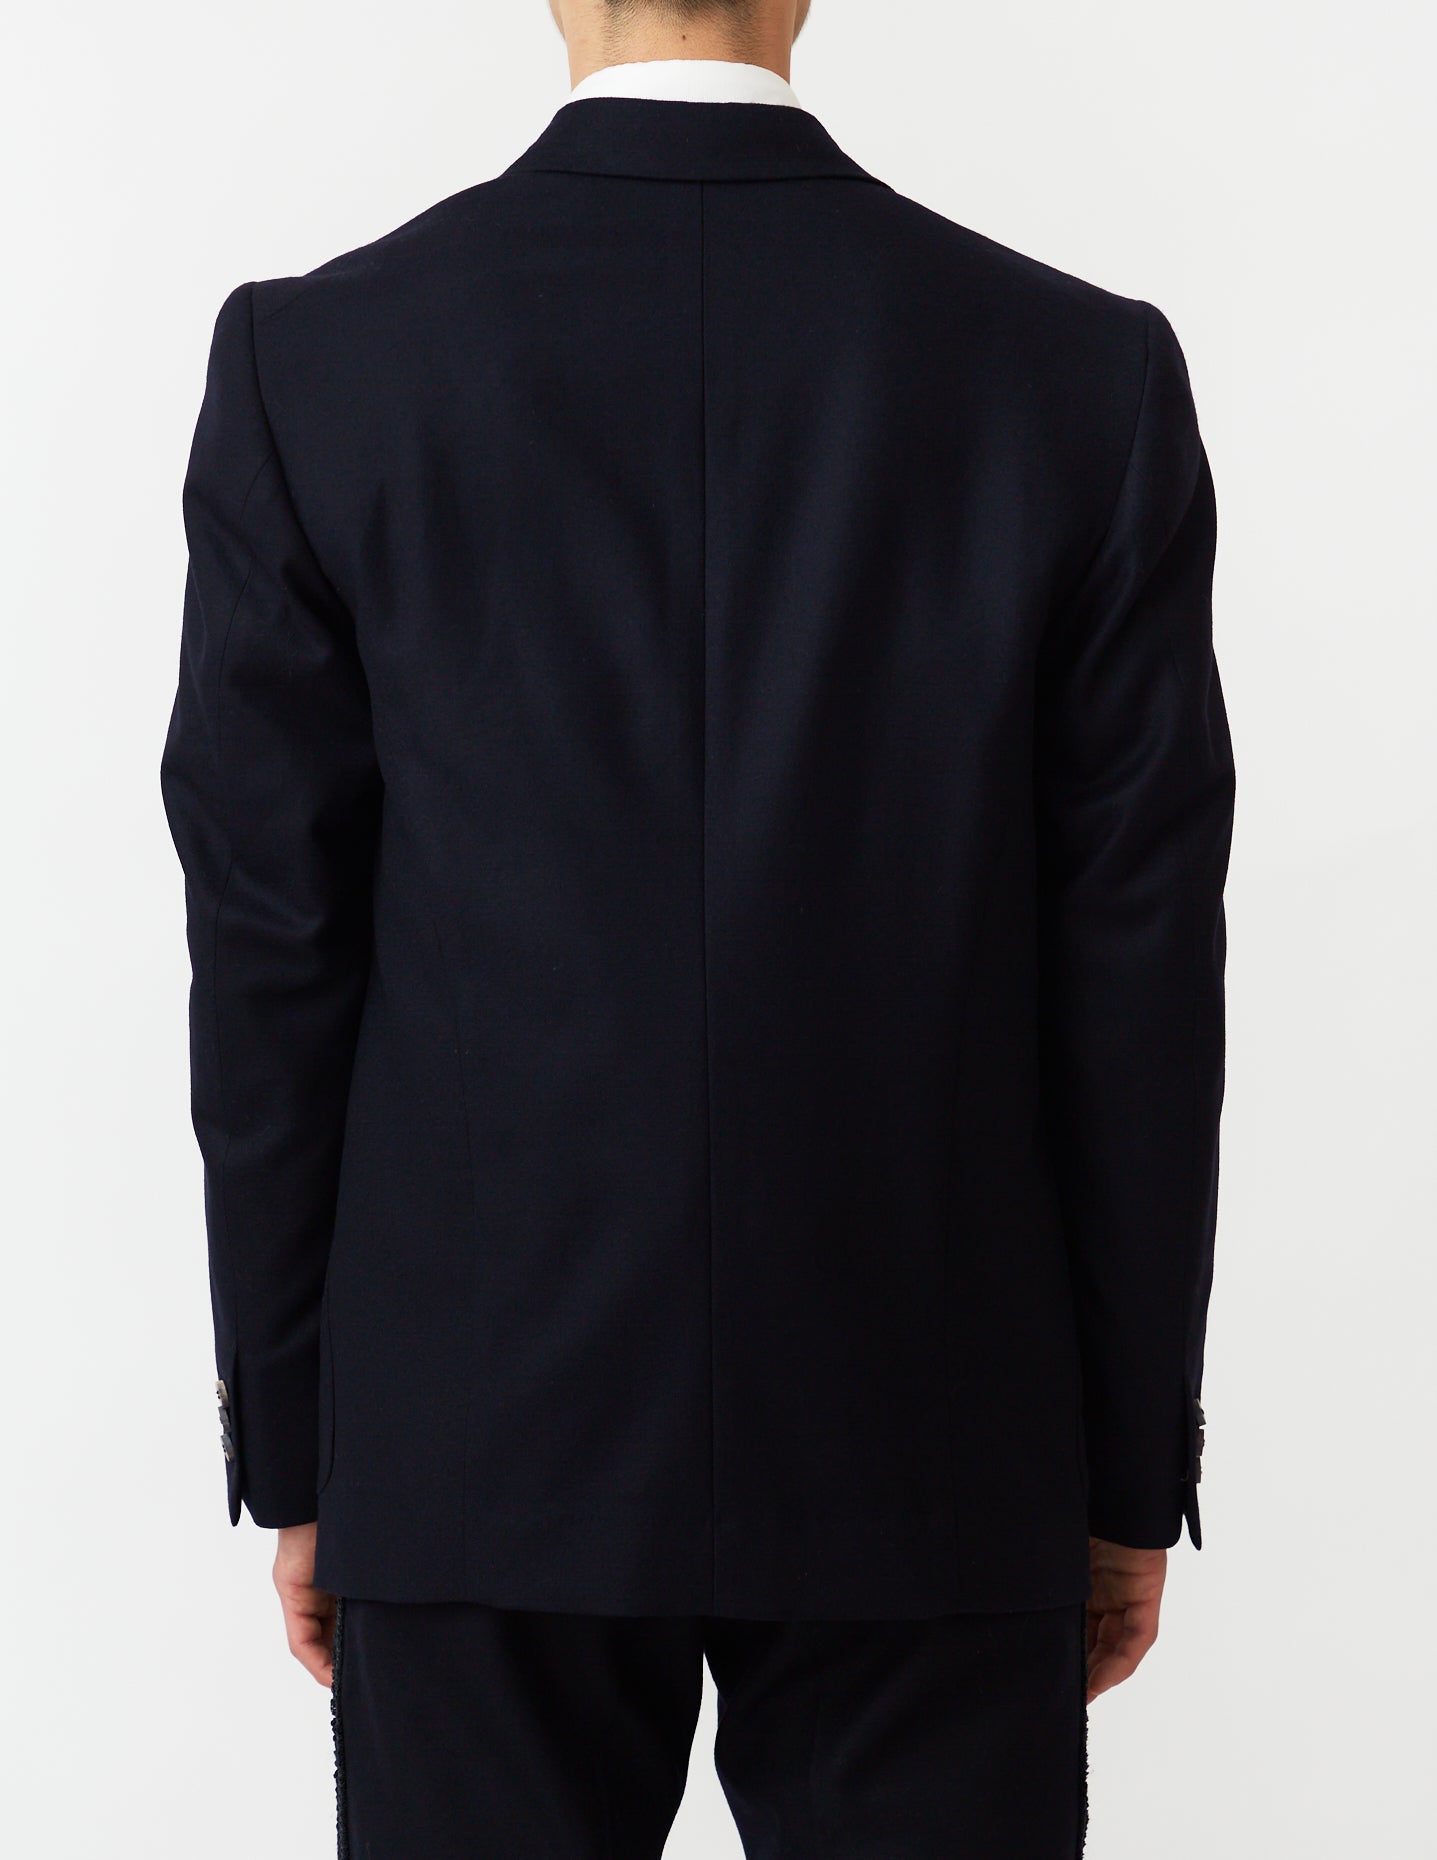 6B DOUBLE-BREASTED JACKET navy